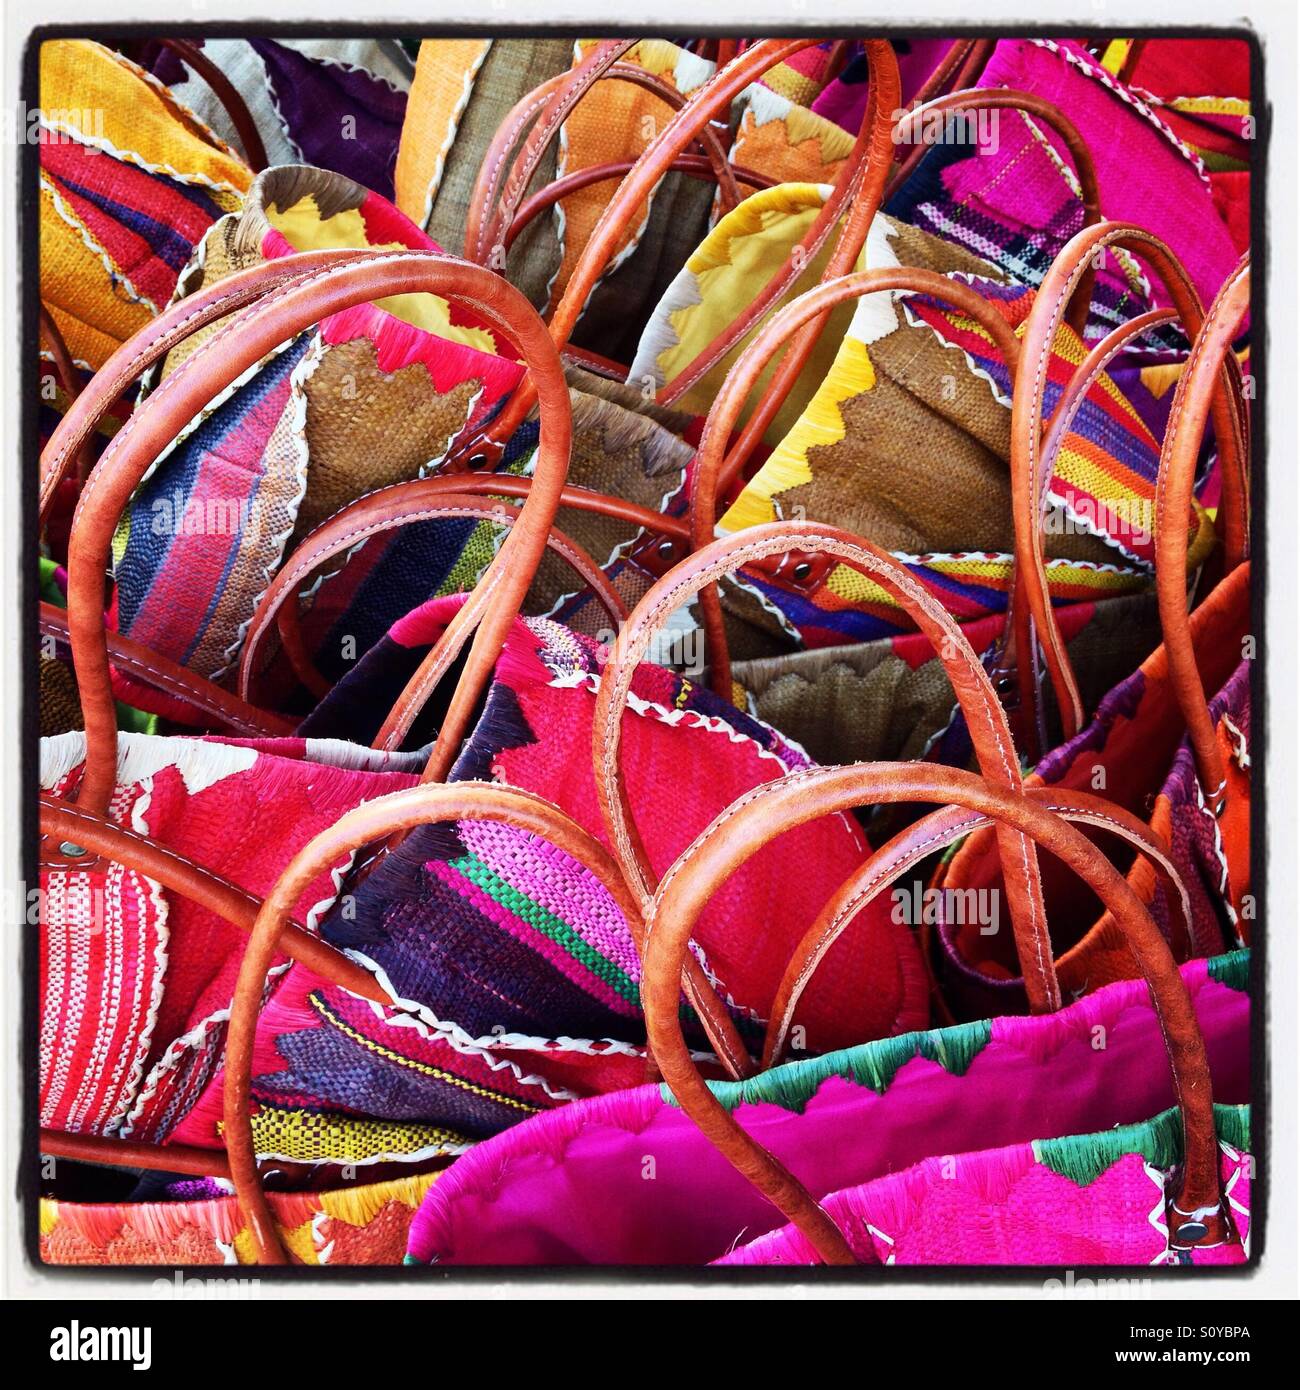 Colourful shopping baskets abstract Stock Photo